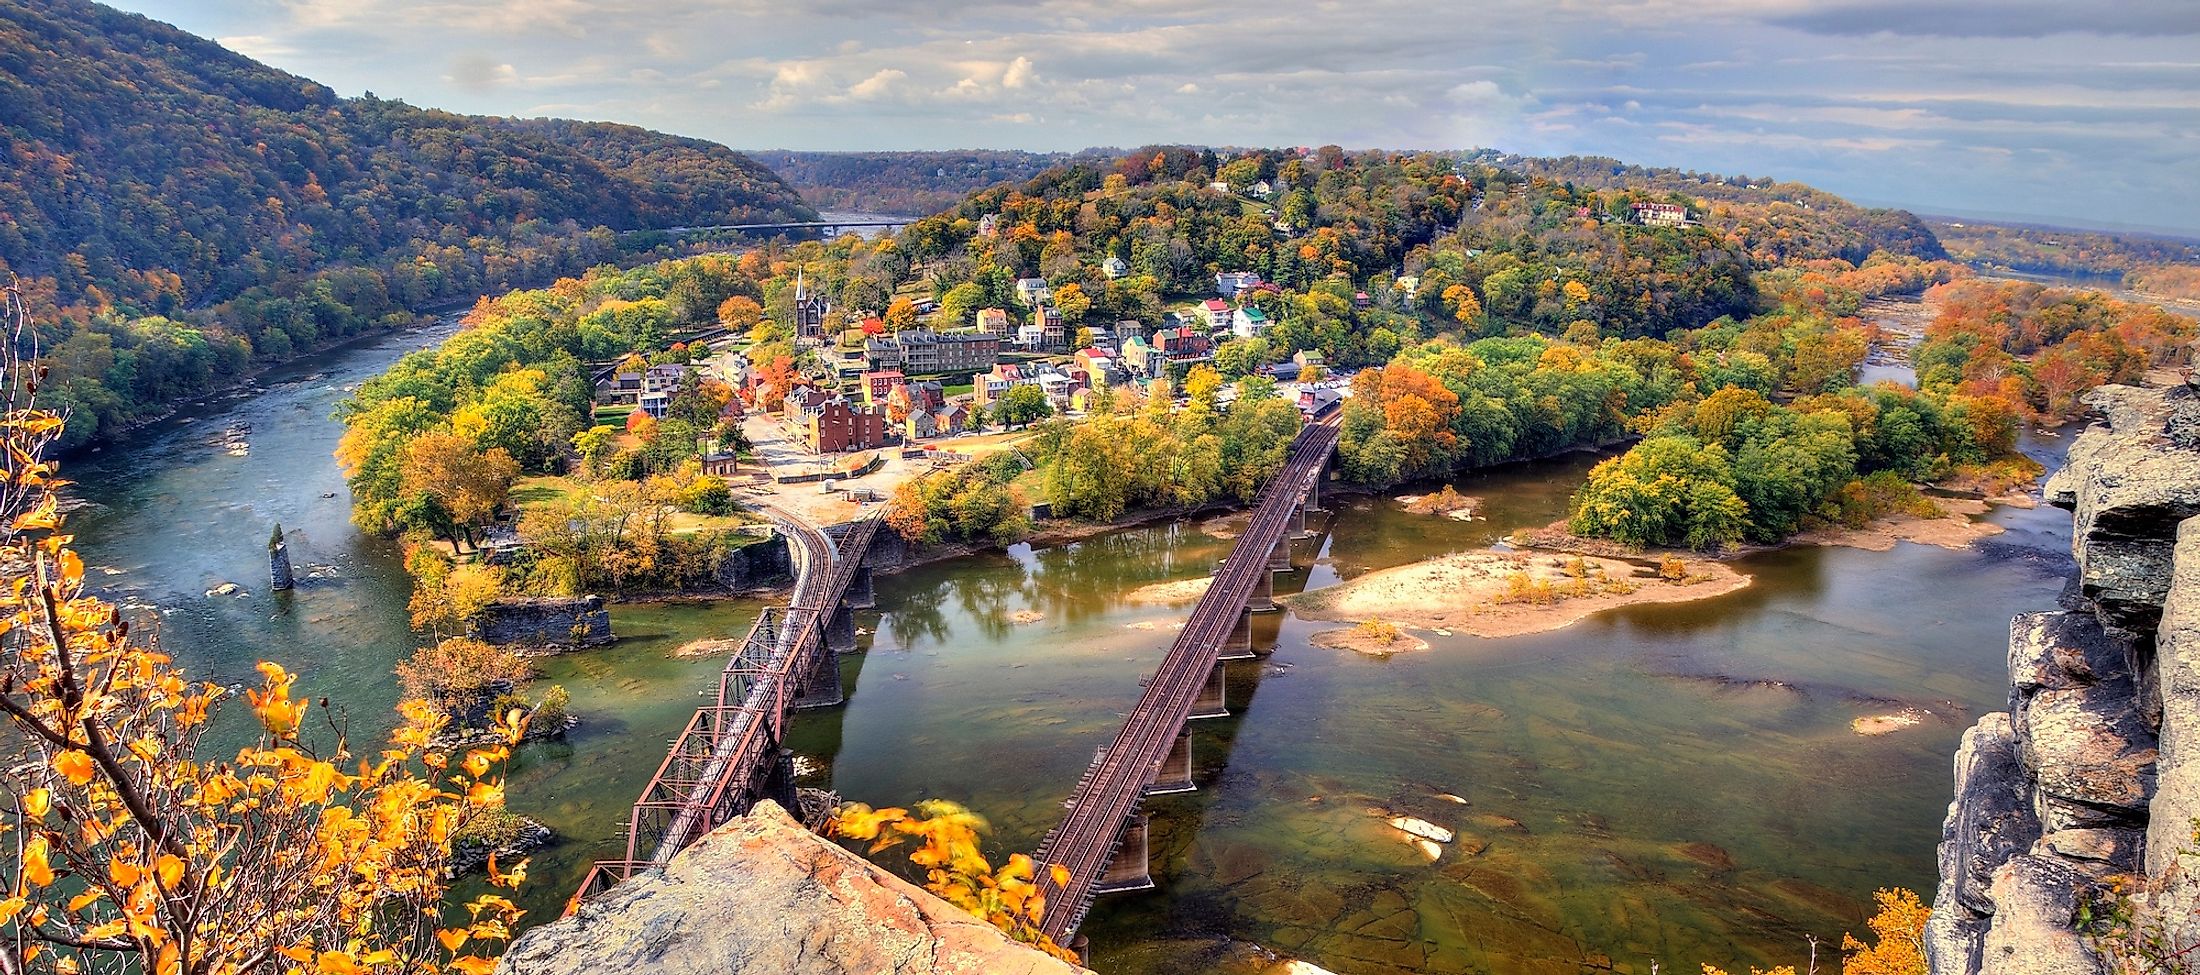 The picturesque town of Harper's Ferry, West Virginia.